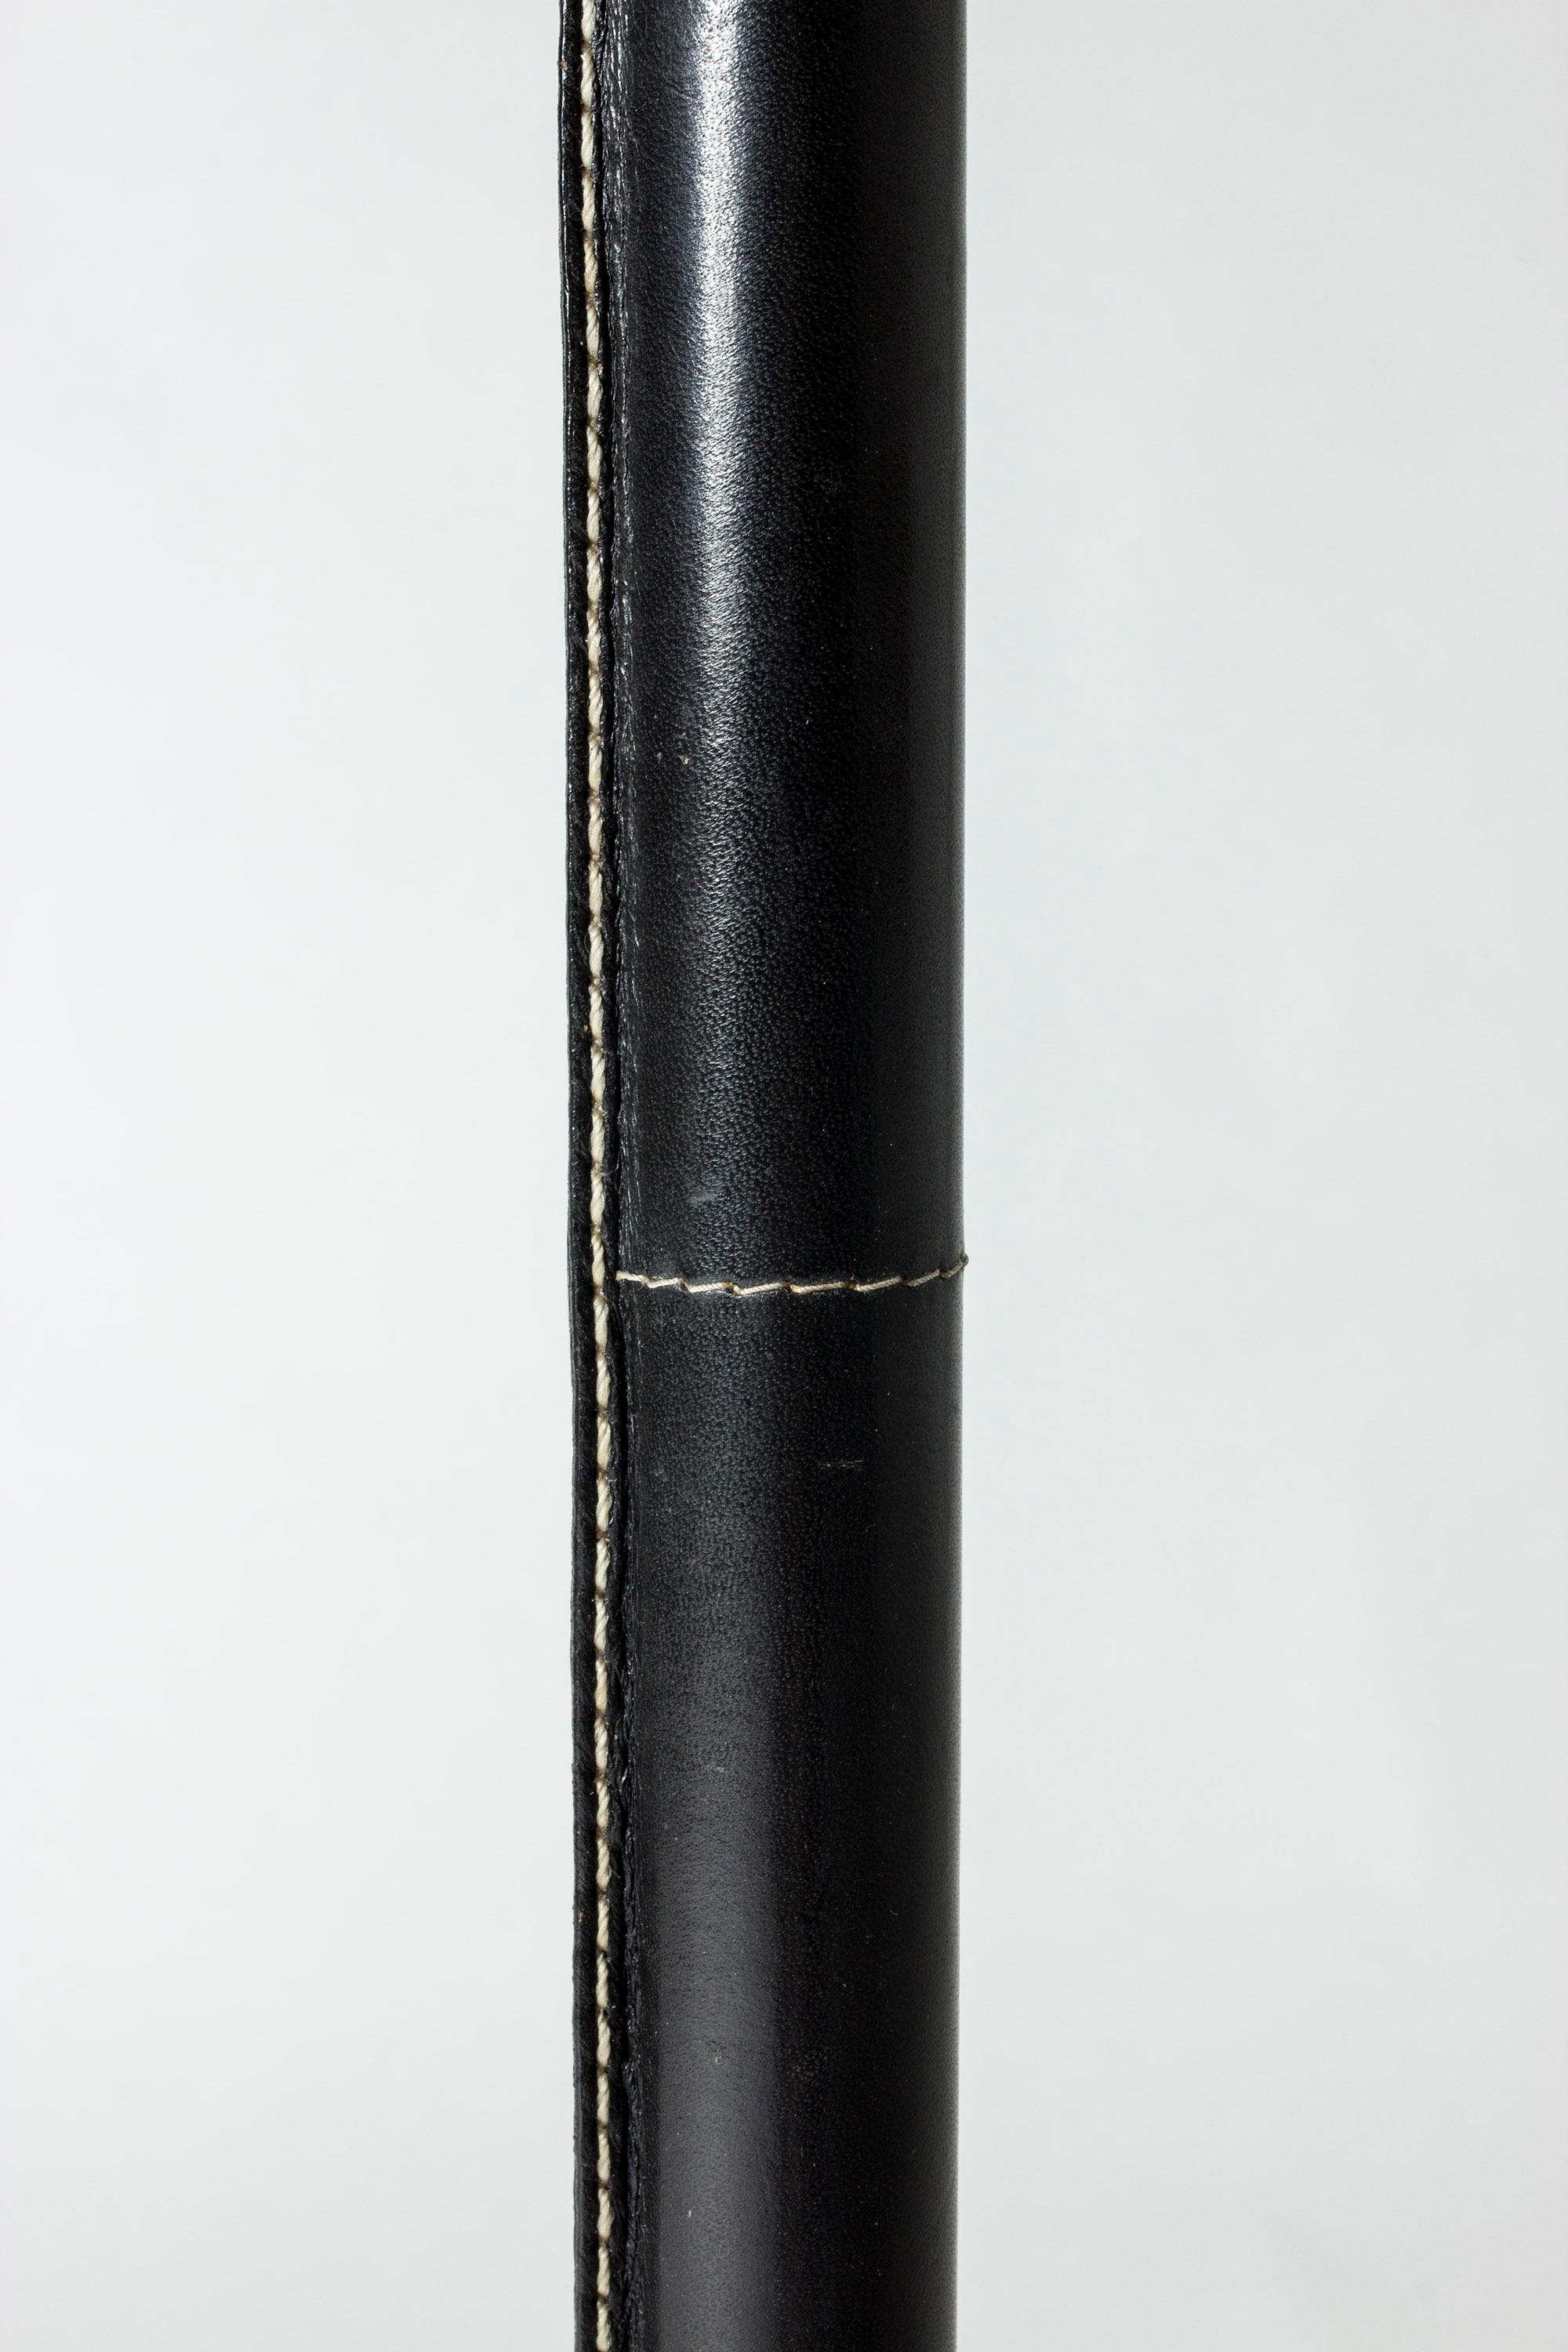 Brass Black Leather Swedish Floor Lamp from Bergboms For Sale